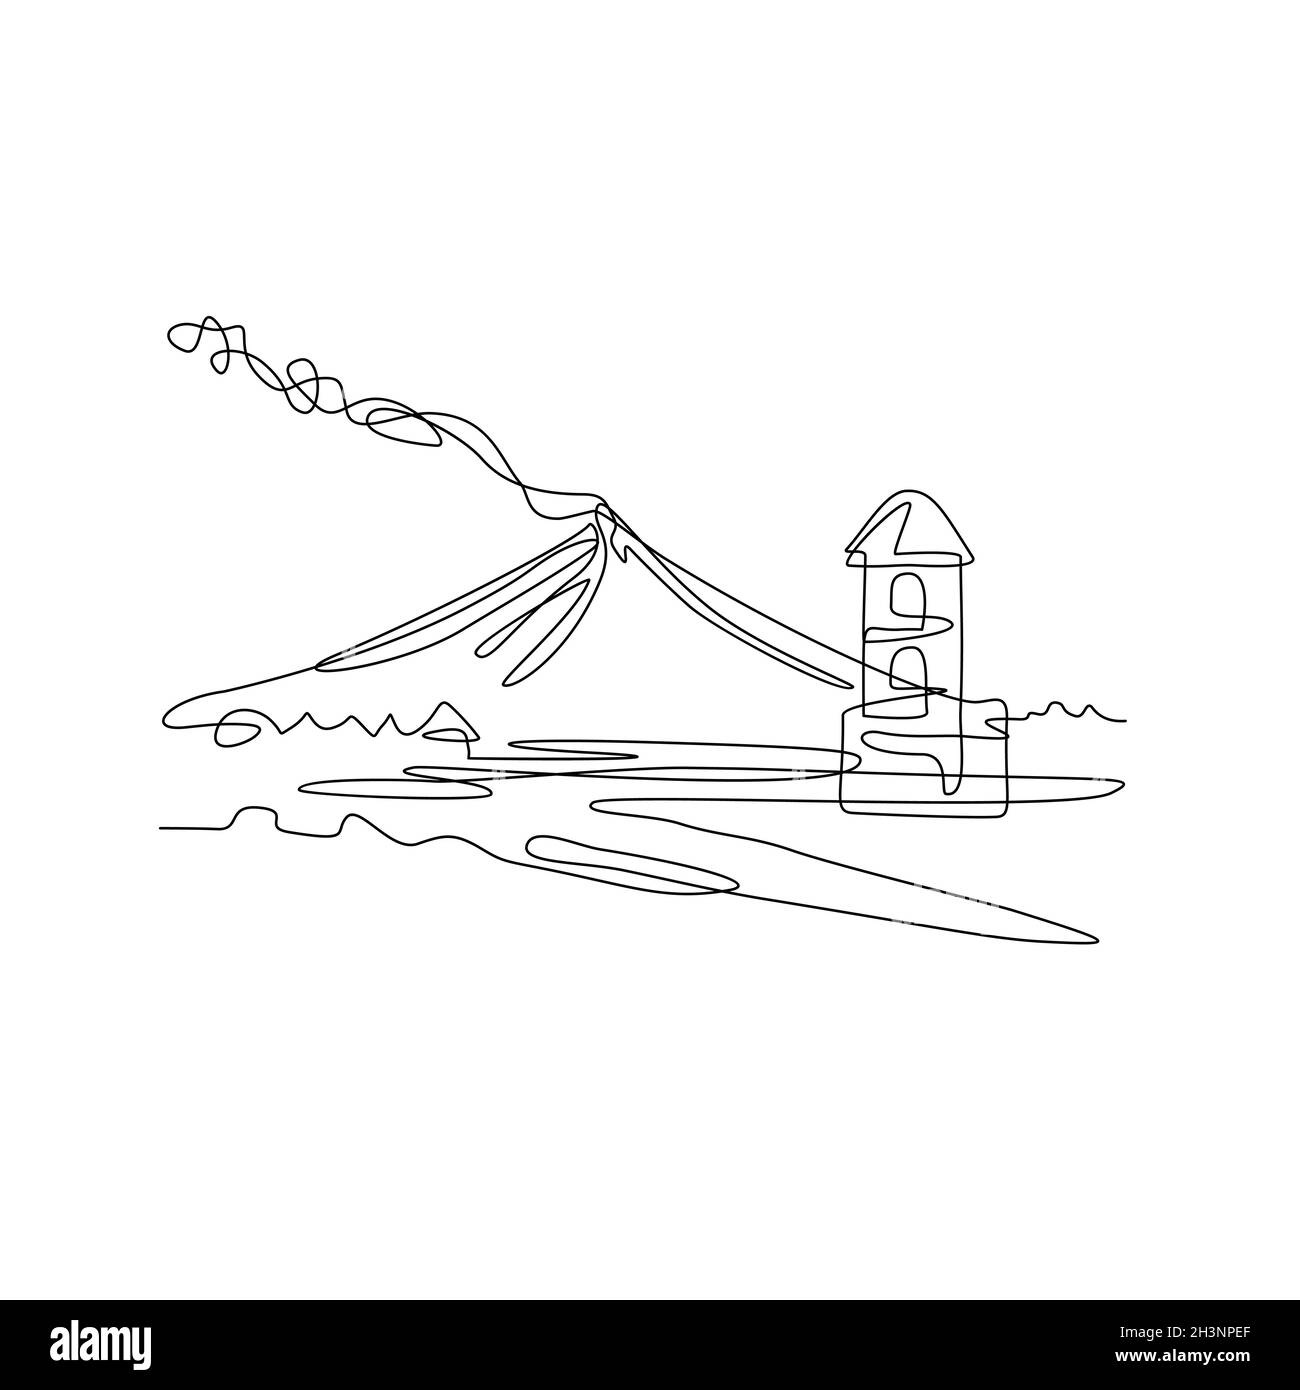 Mayon Volcano or Mount Mayon with Cagsawa Church Bell Tower Ruins Continuous Line Drawing Stock Photo